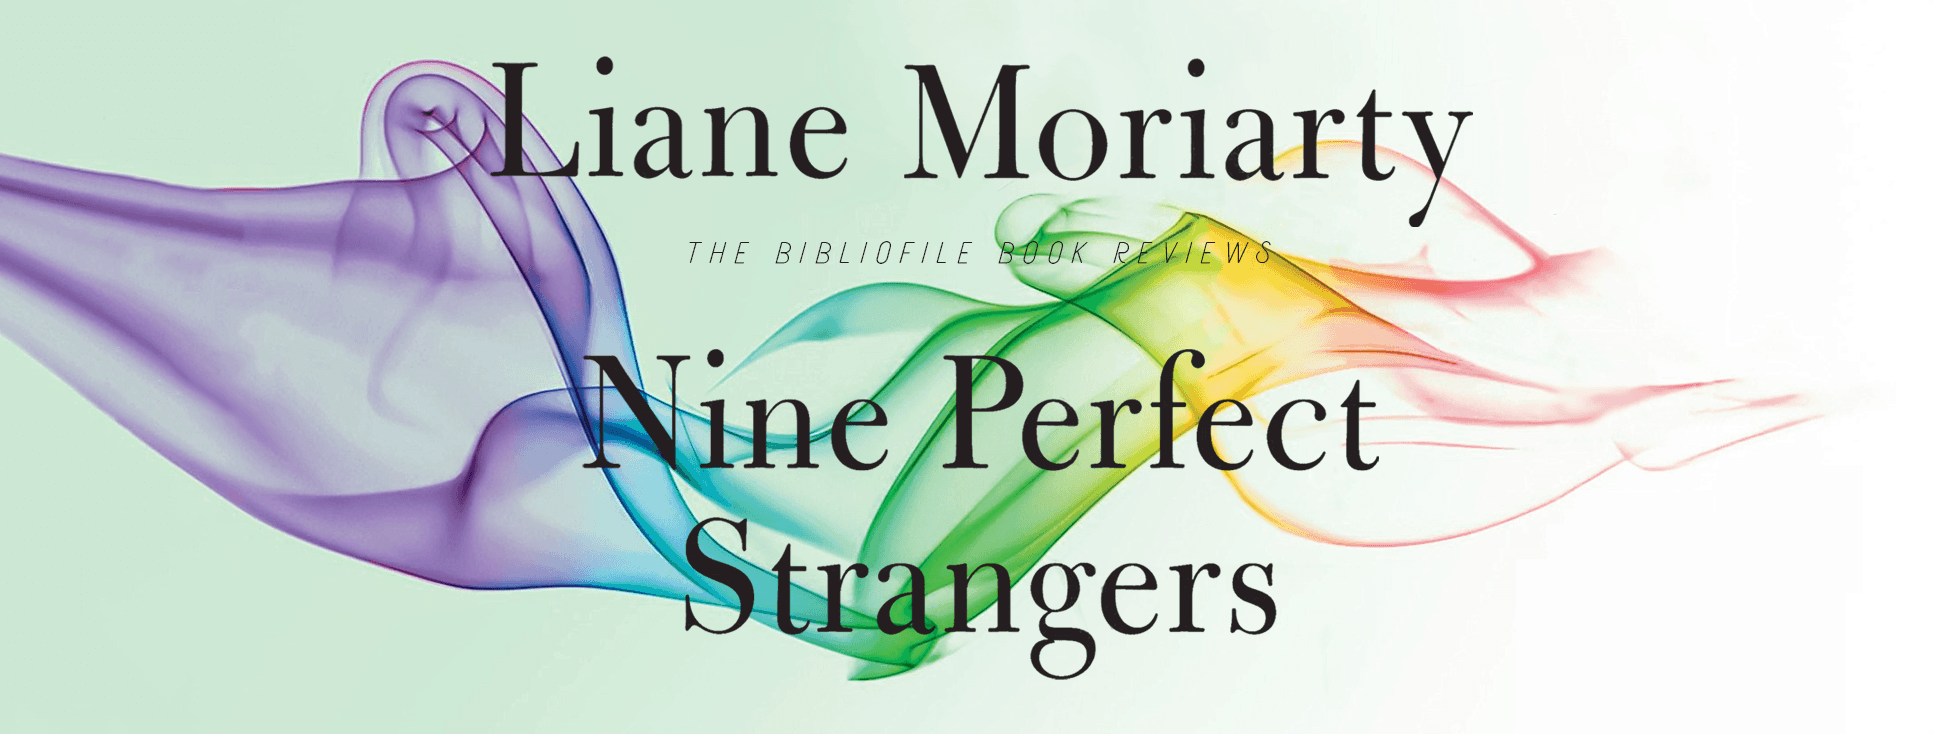 nine perfect strangers liane moriarty summary review